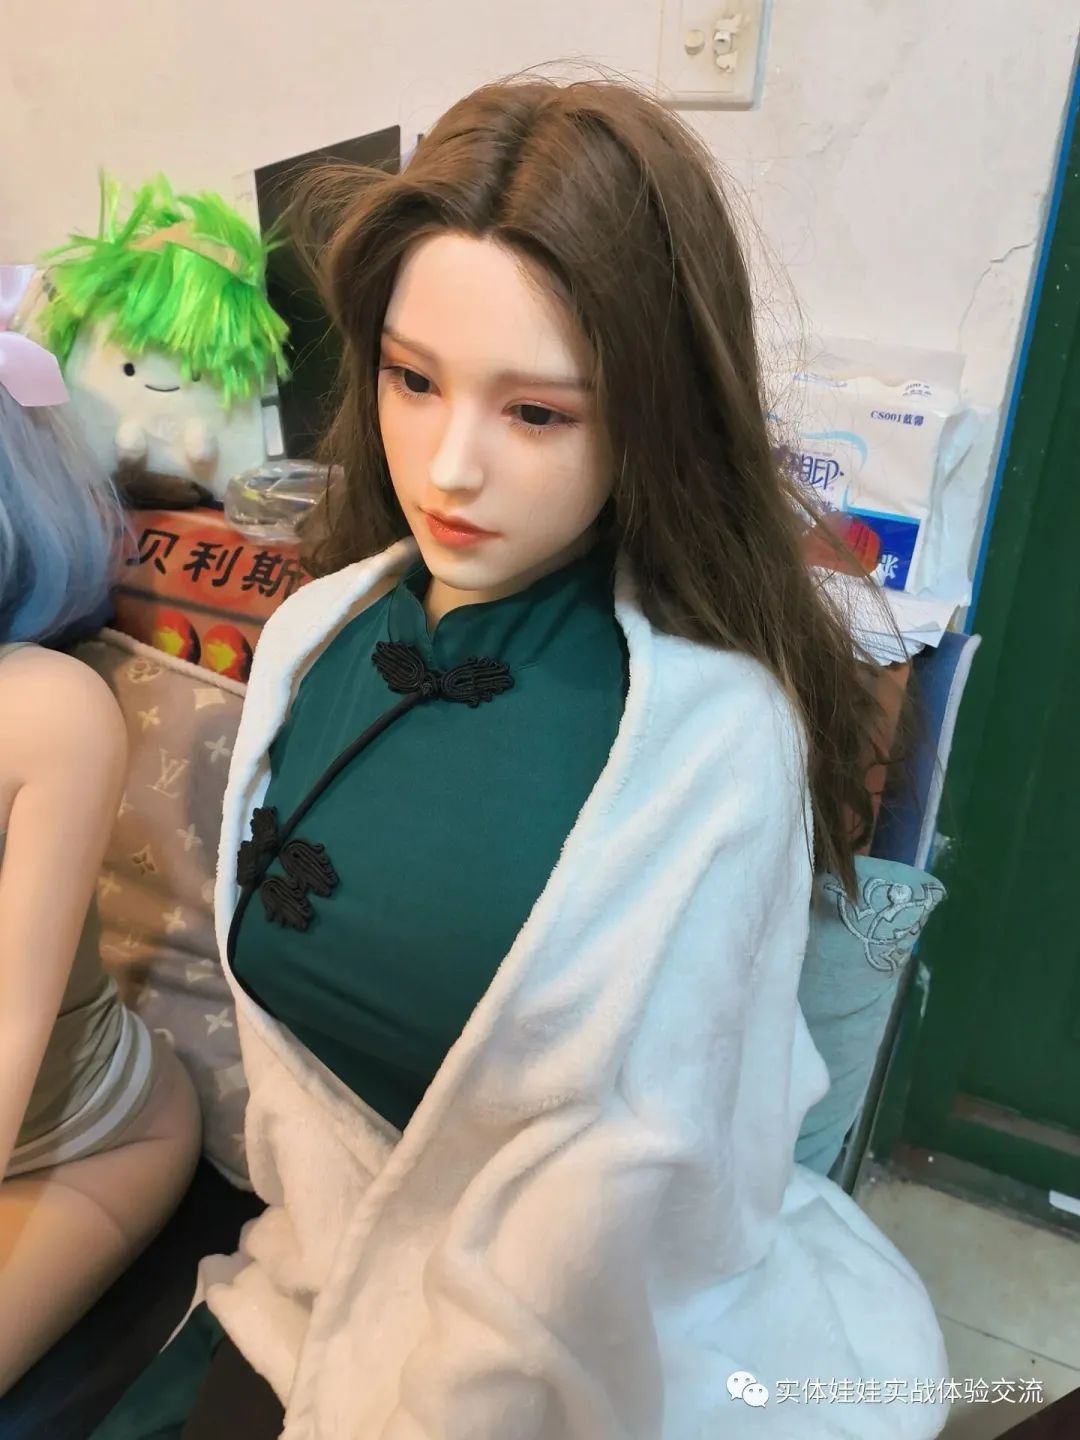 Did you feel cheated when you bought a 2000 entity doll online?